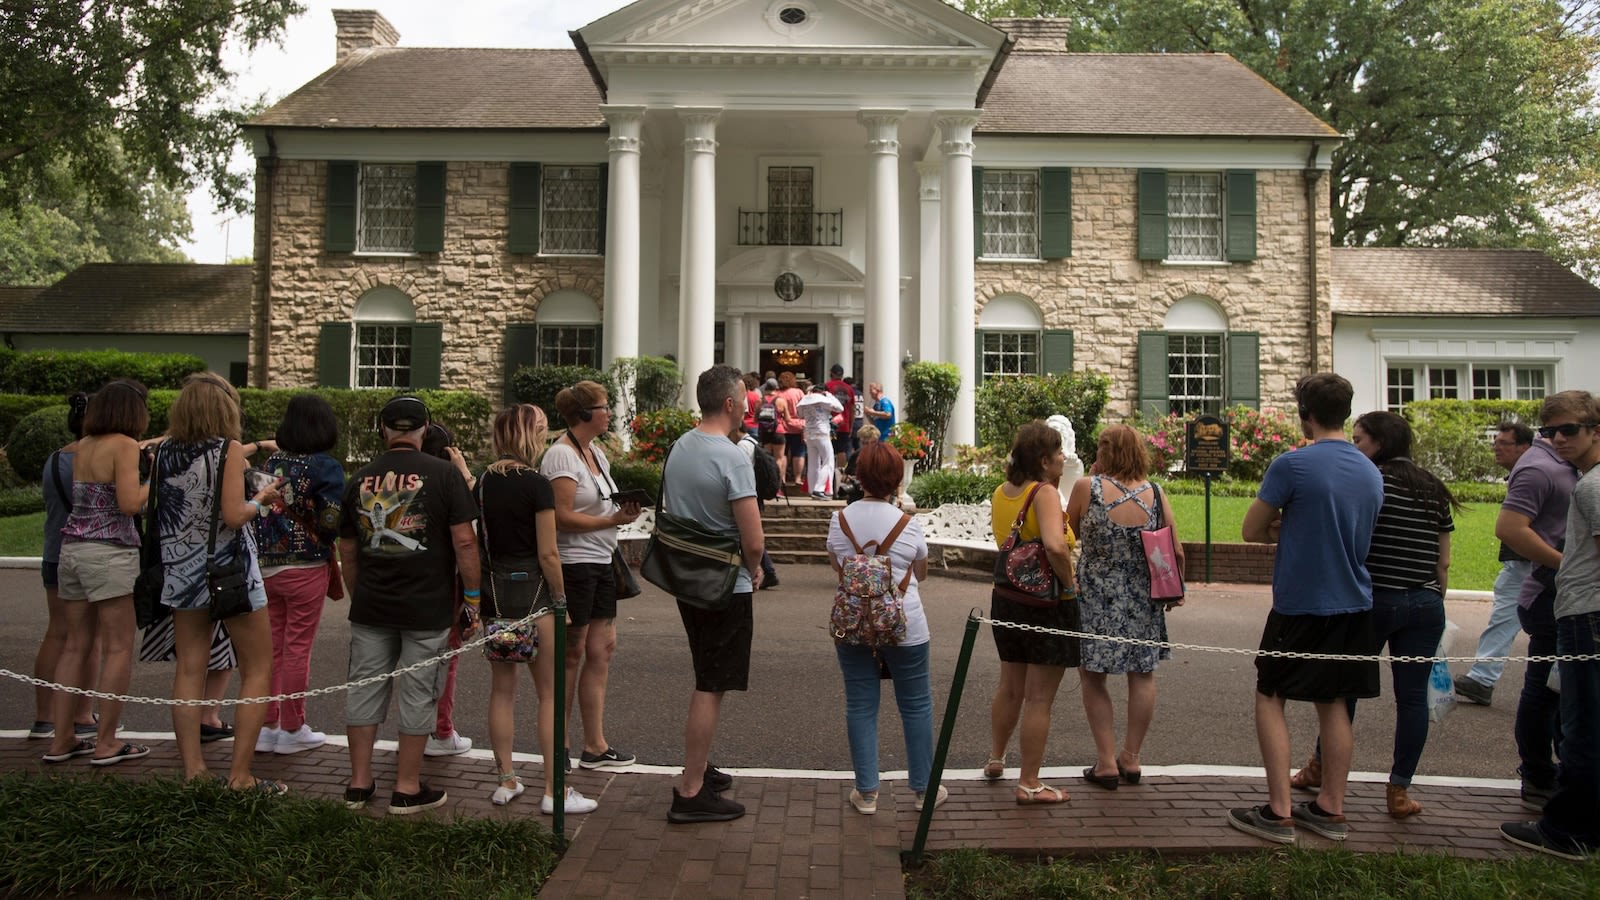 Tennessee attorney general looking into attempt to sell Graceland in foreclosure auction